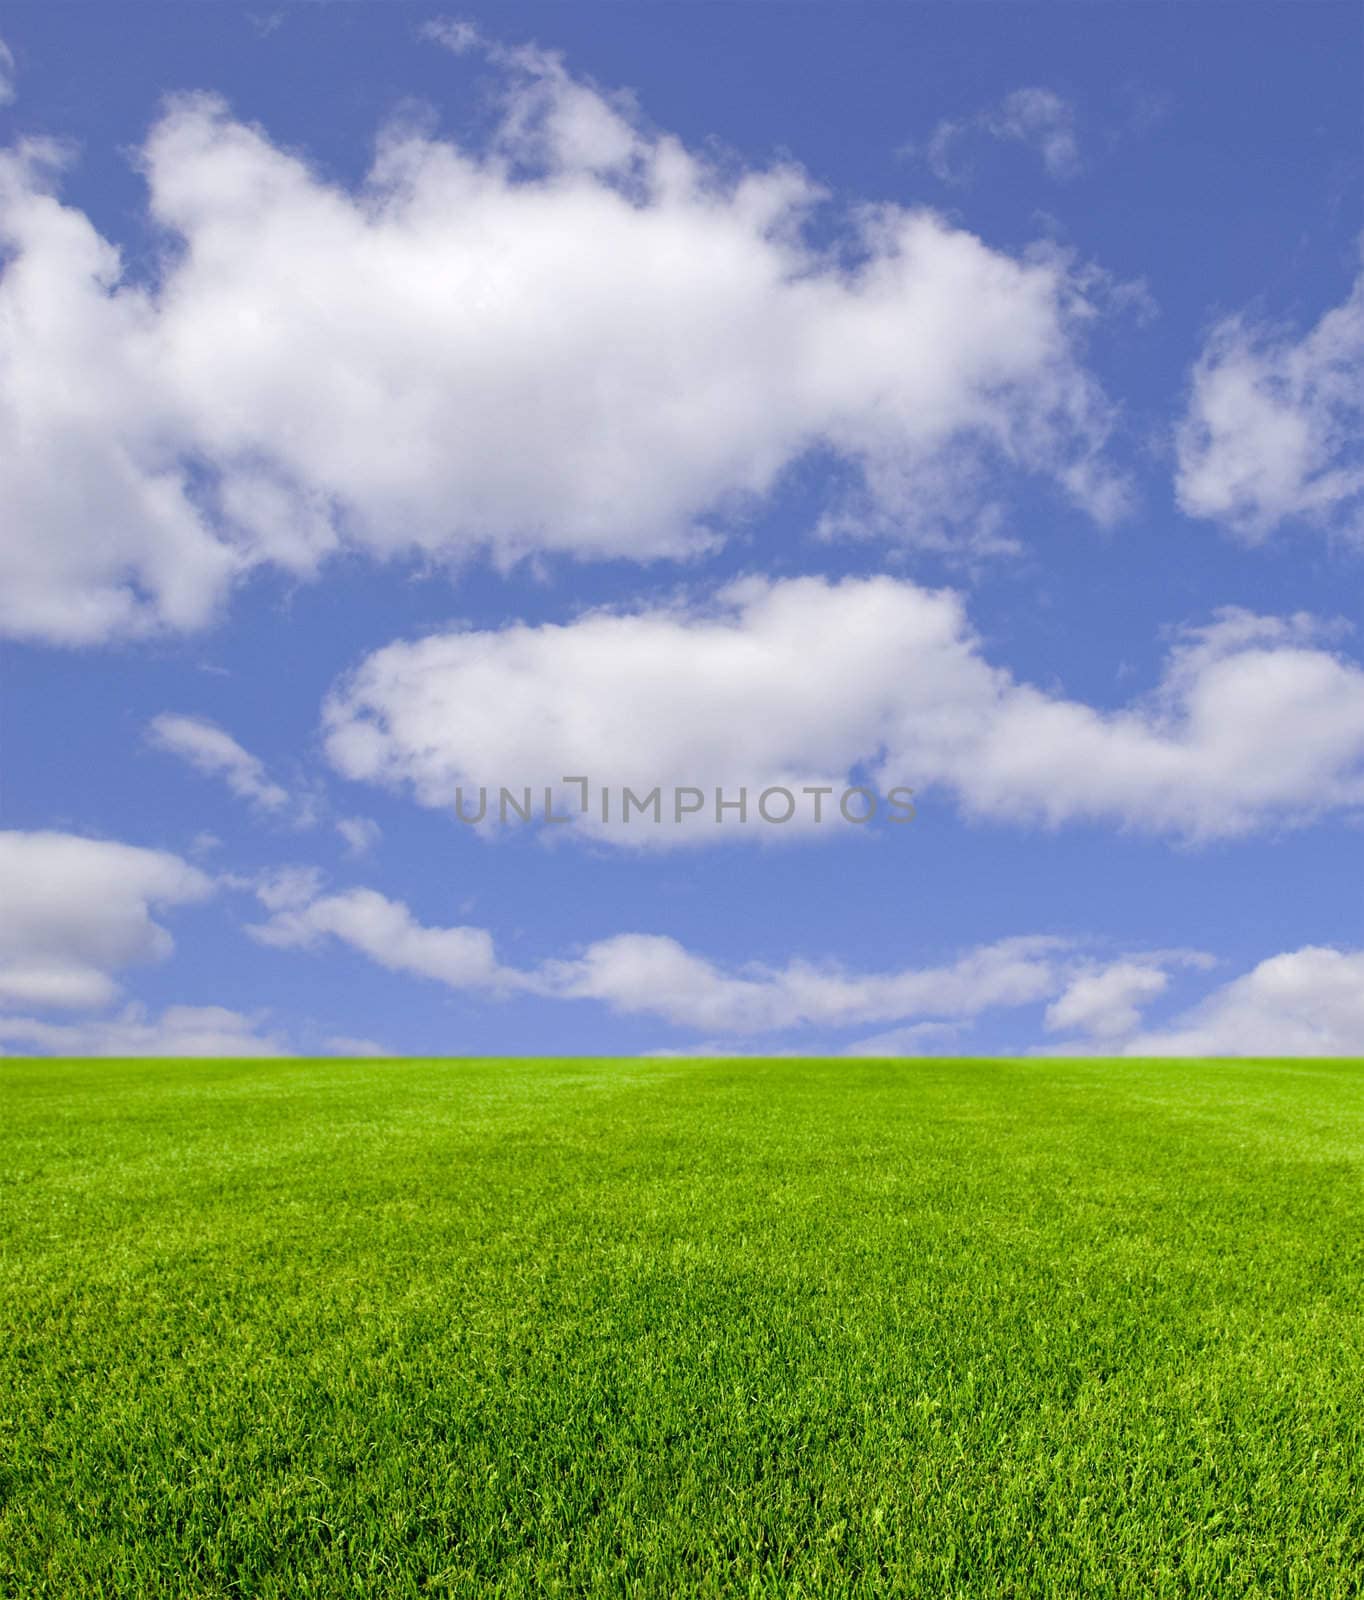 Sky and grass by f/2sumicron